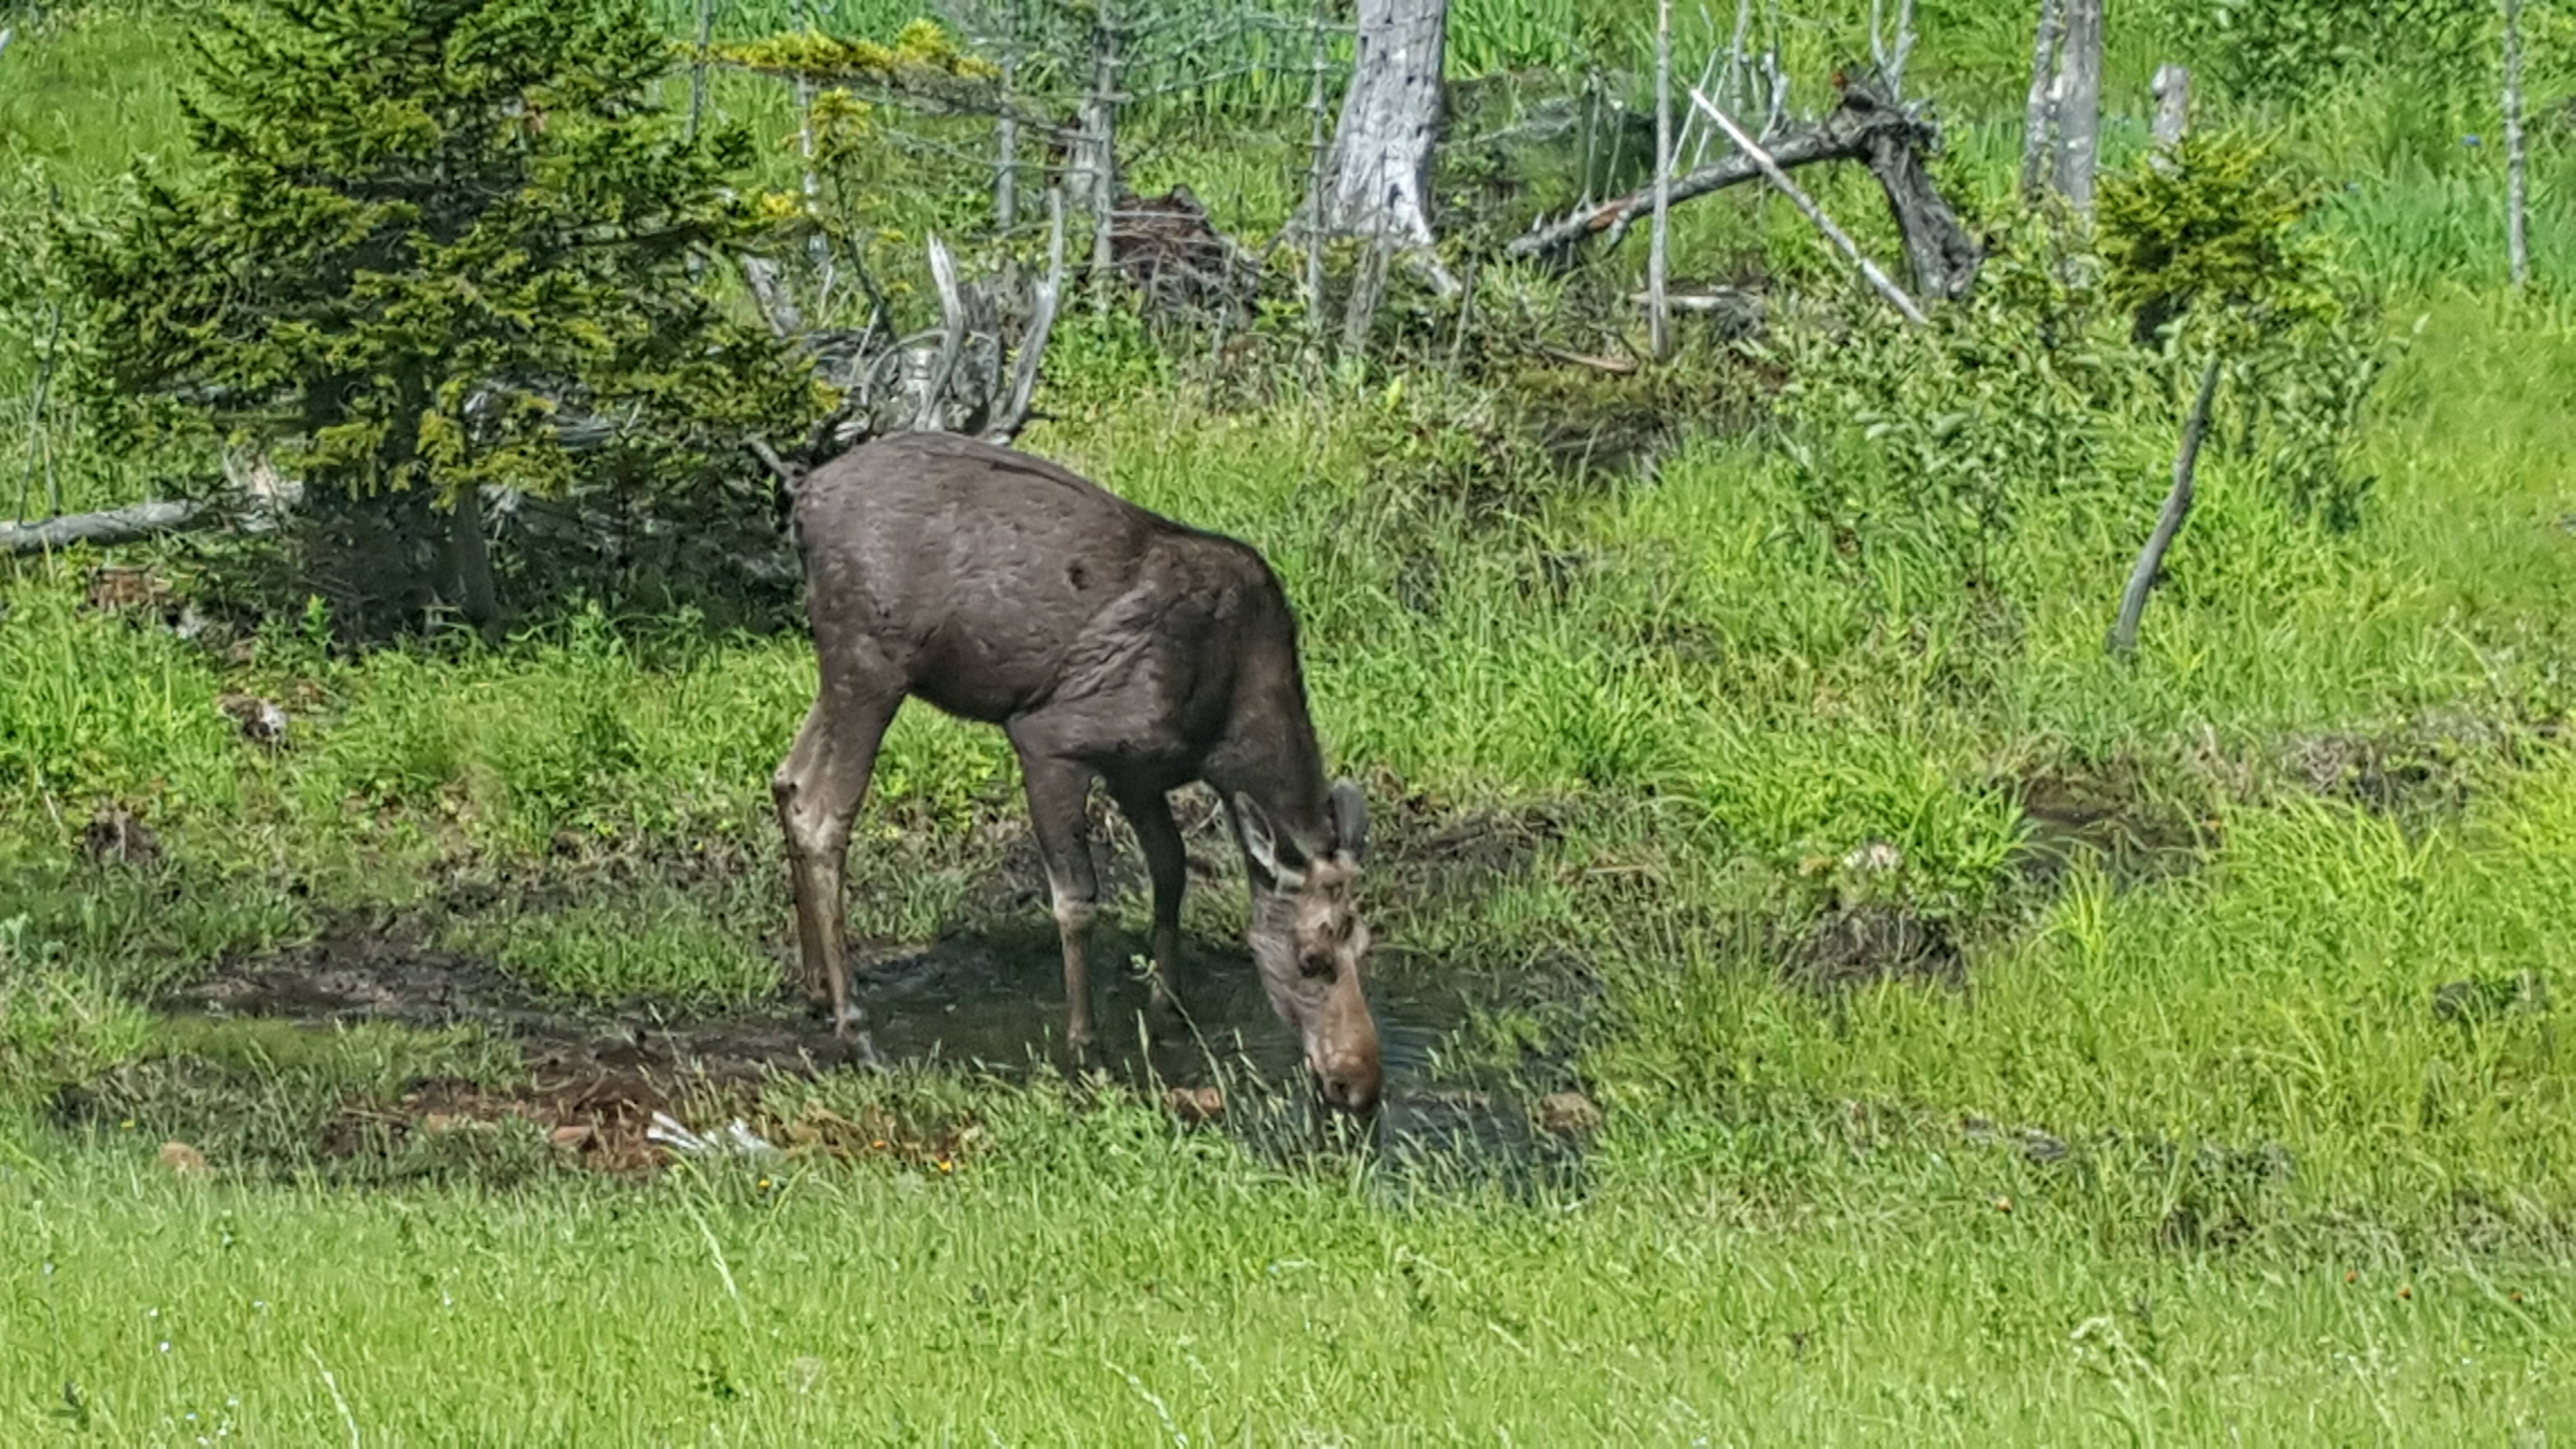 Moose standing near forest.